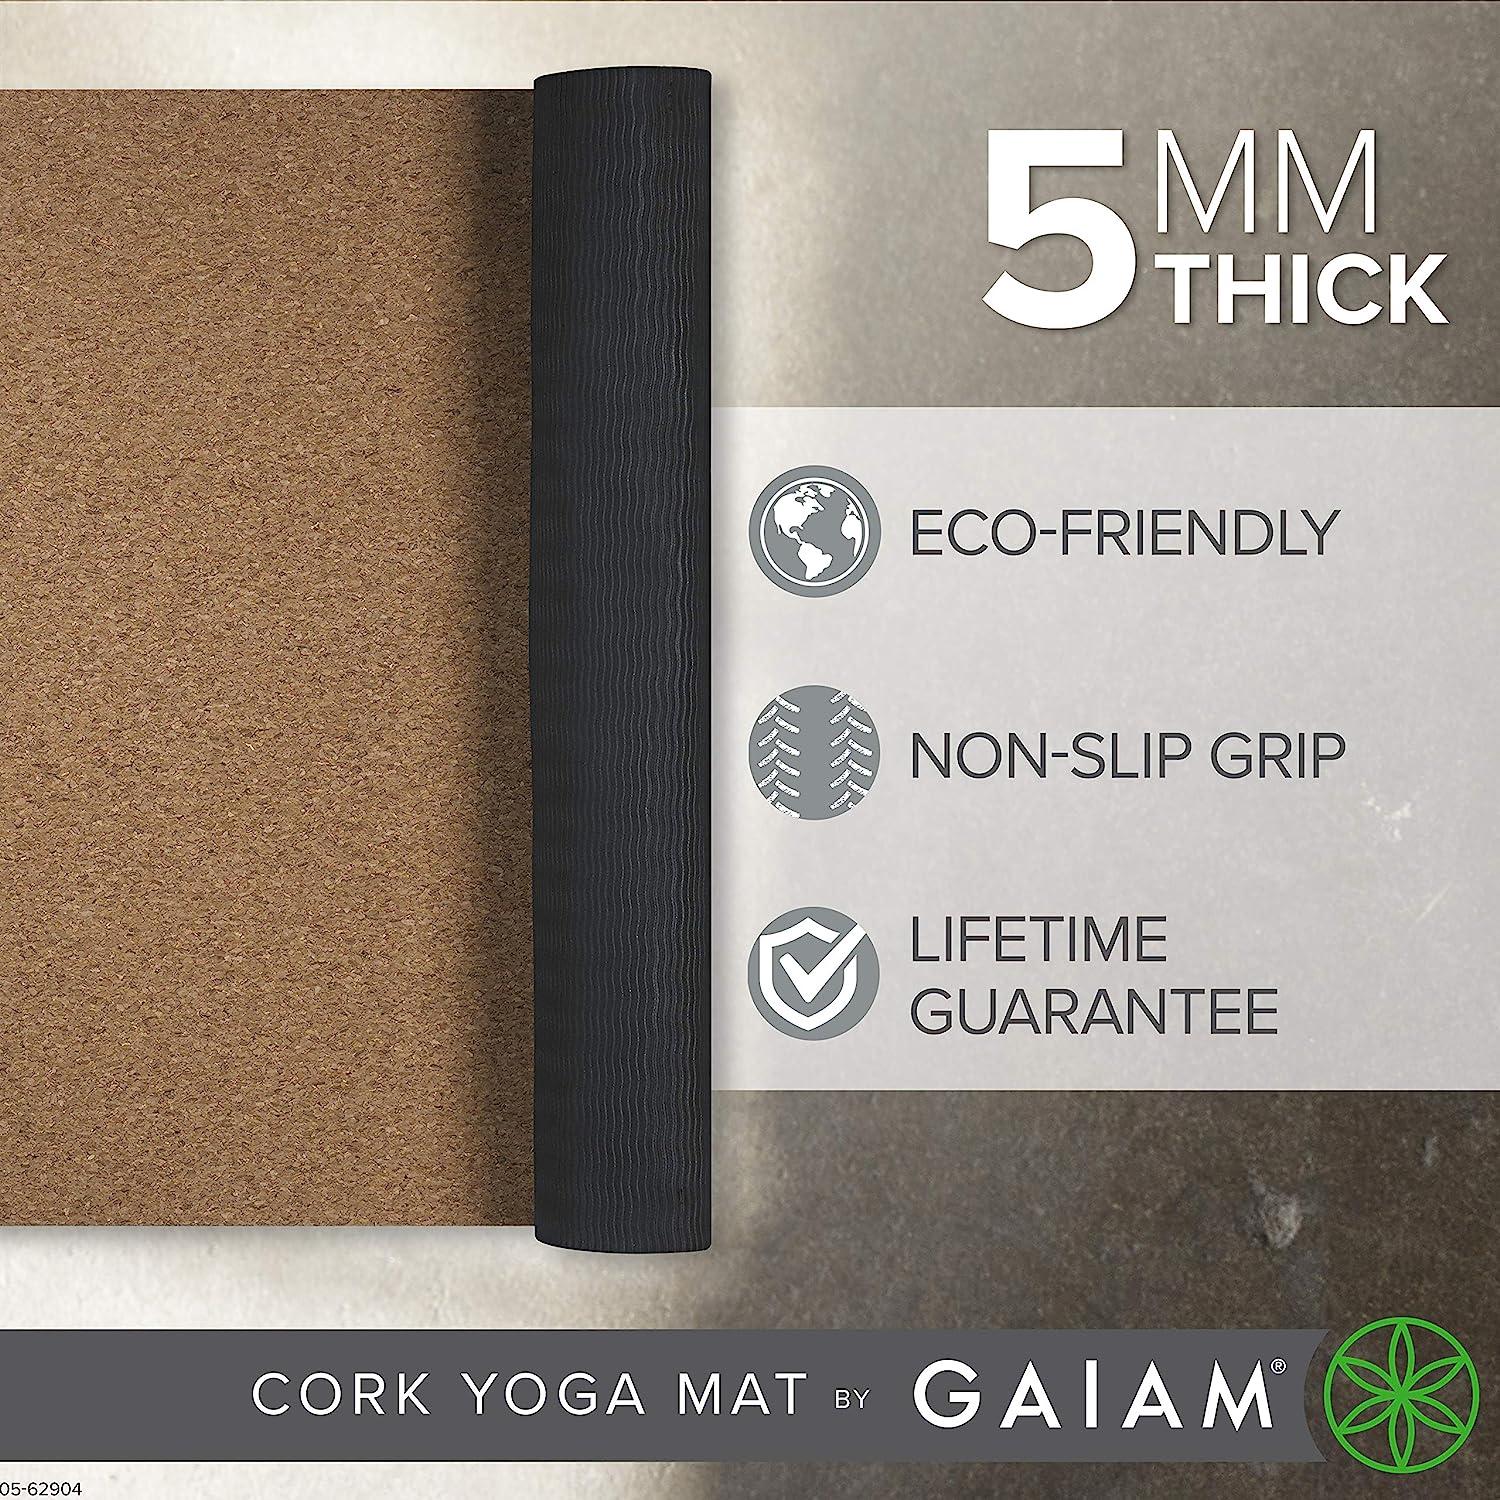 Gaiam Yoga Mat Cork - Great for Hot Yoga, Pilates (68-Inch x 24-Inch x 5mm  Thick)